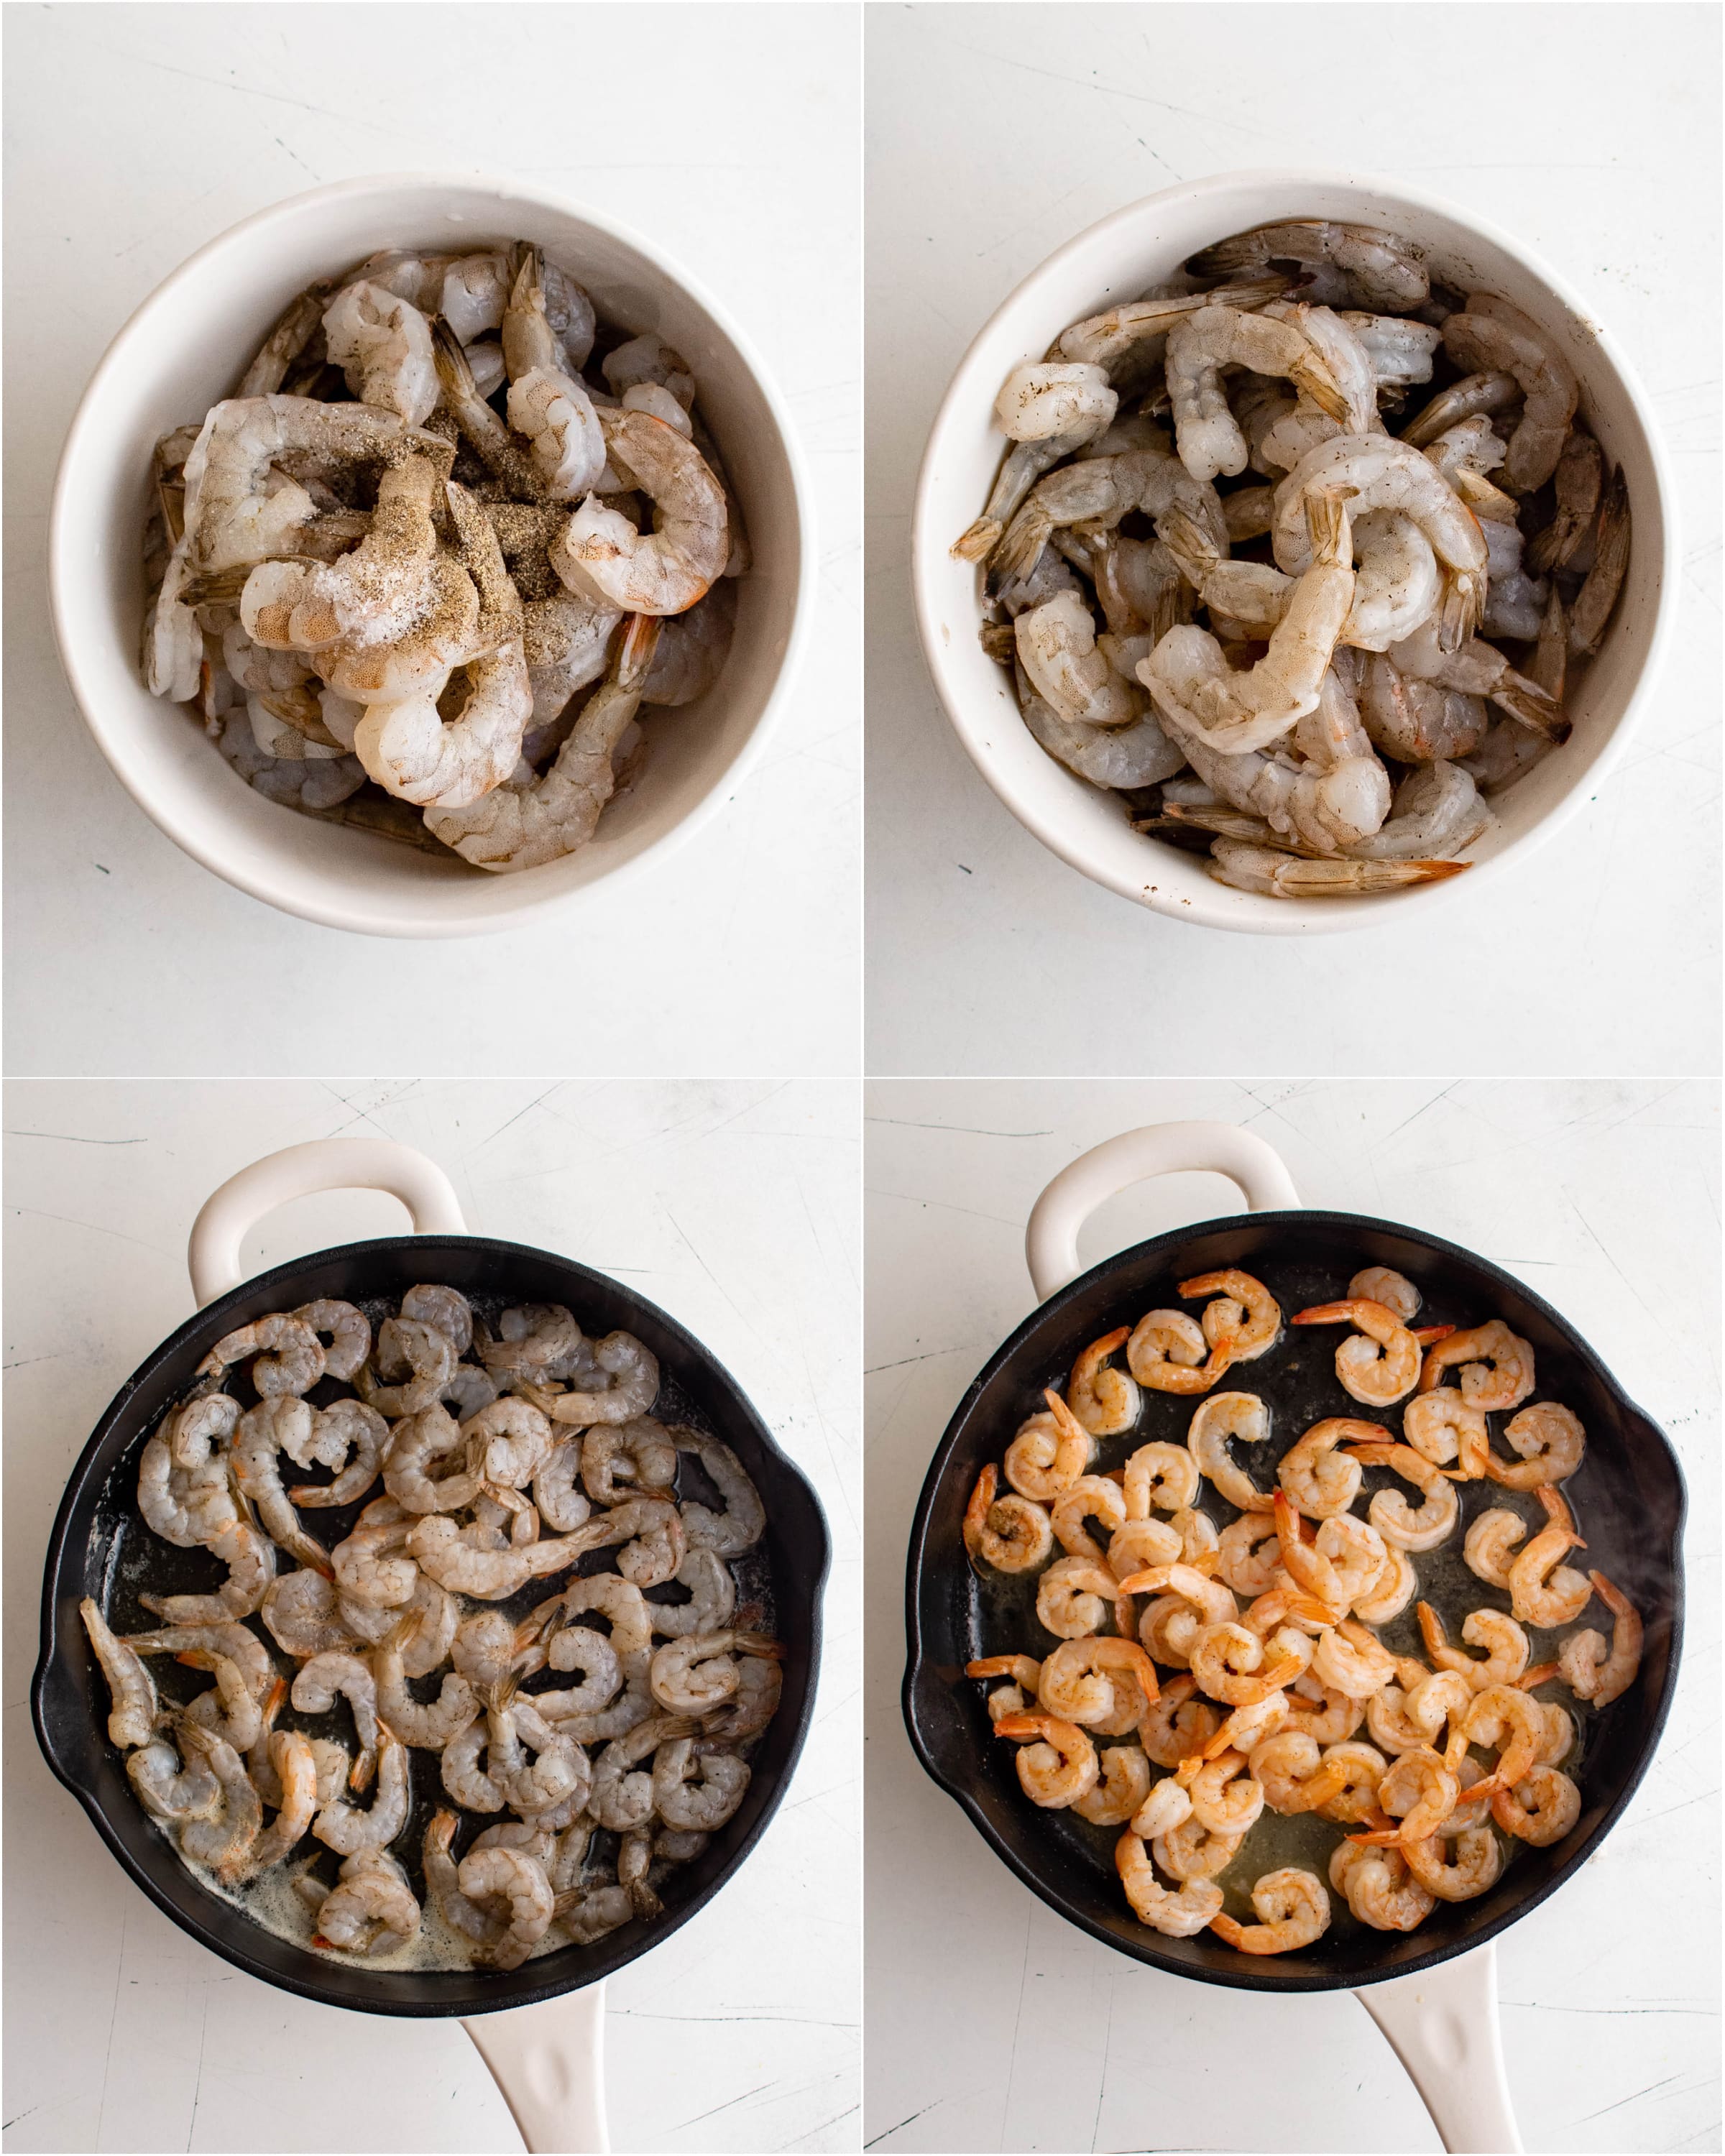 Four images in a collage: the first image shows raw shrimp in a white bowl; the second image shows raw shrimp in a white bowl seasoned with salt and black pepper; the third image shows raw shrimp added to a large hot skillet; the fourth image shows cooked shrimp in a large skillet.